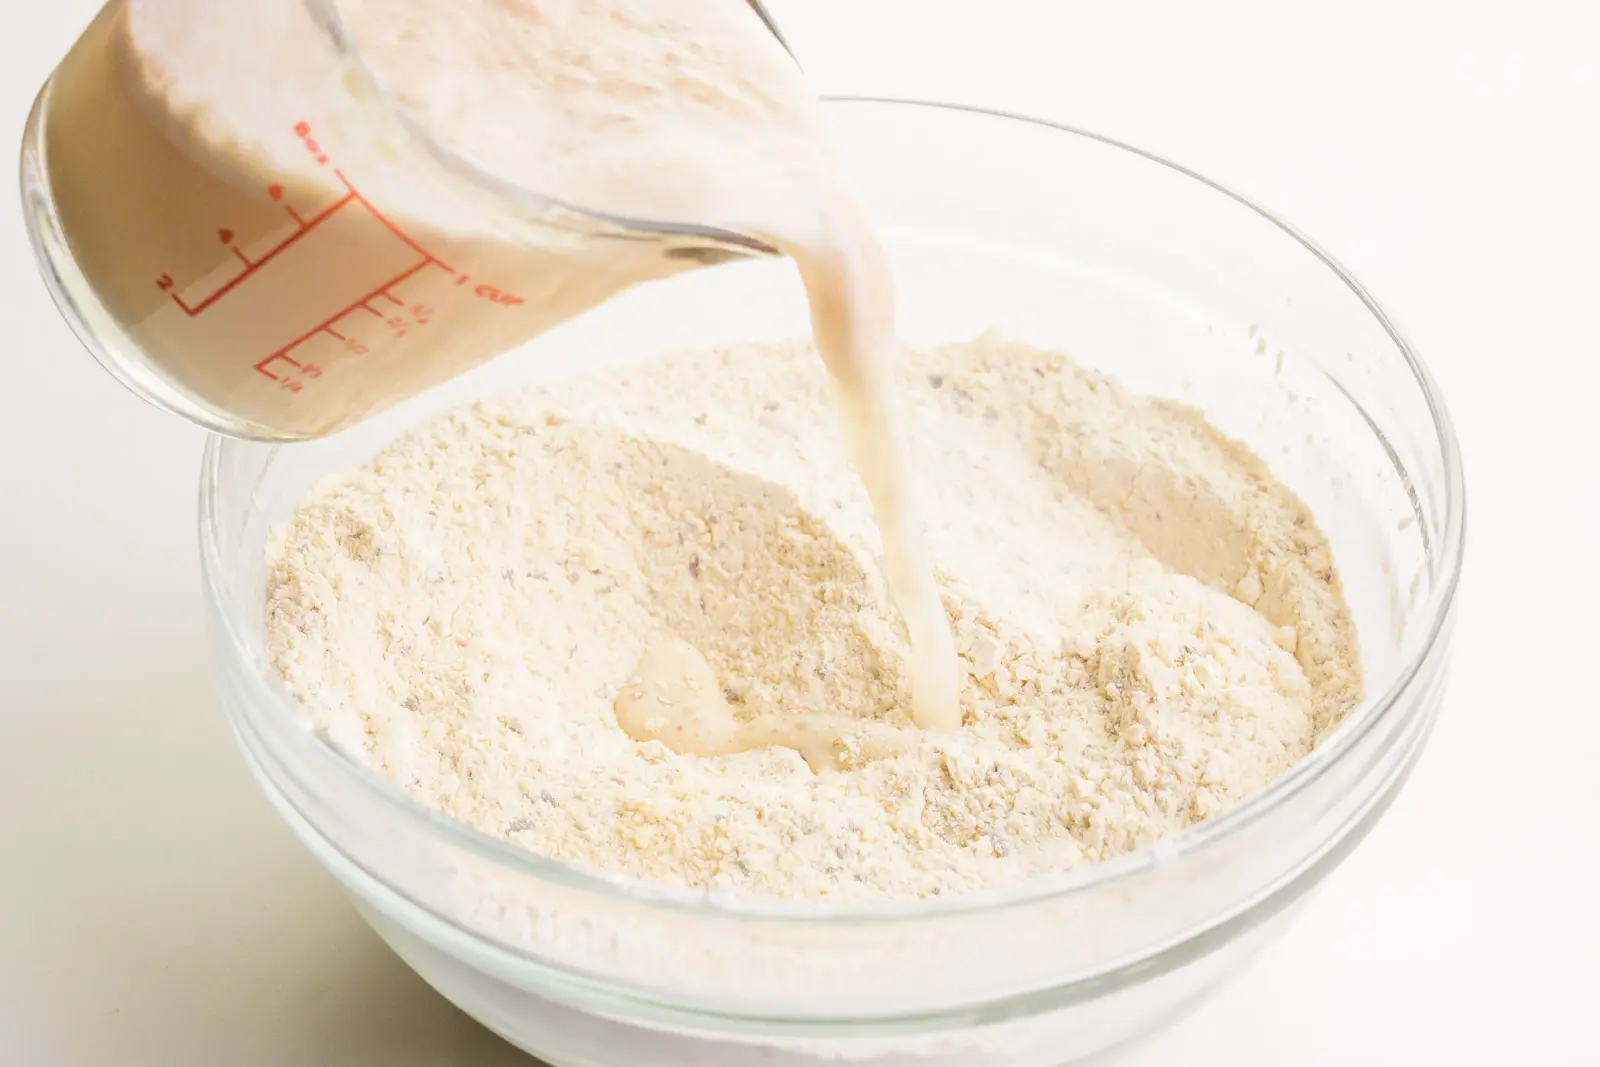 A milky yeast mixture is being poured into a bowl with a cassava flour mixture.